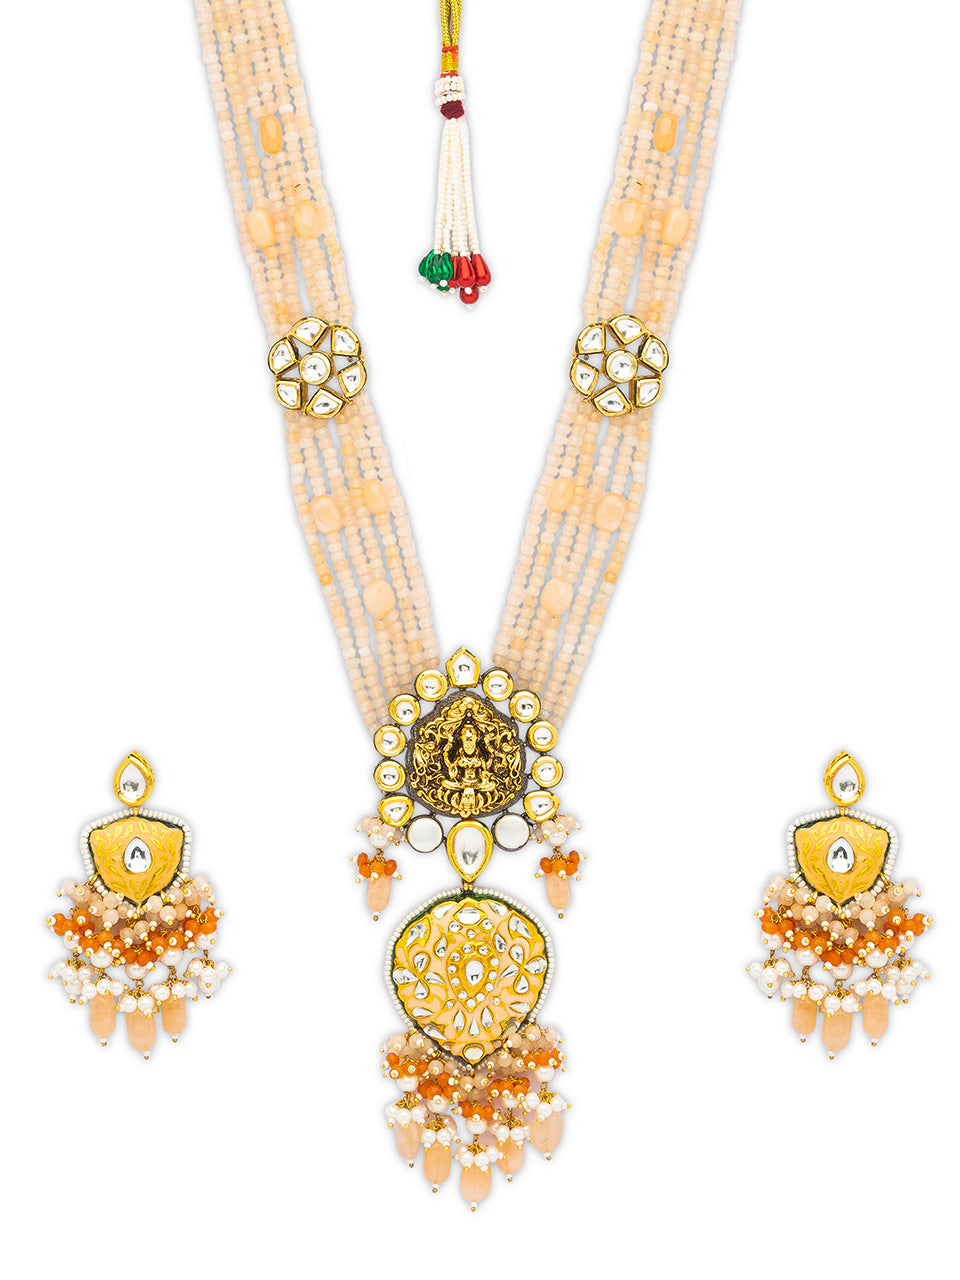 Necklace with Meenakari work, Agates, Golden polished Brass, Pearls & Onyx Tumbles